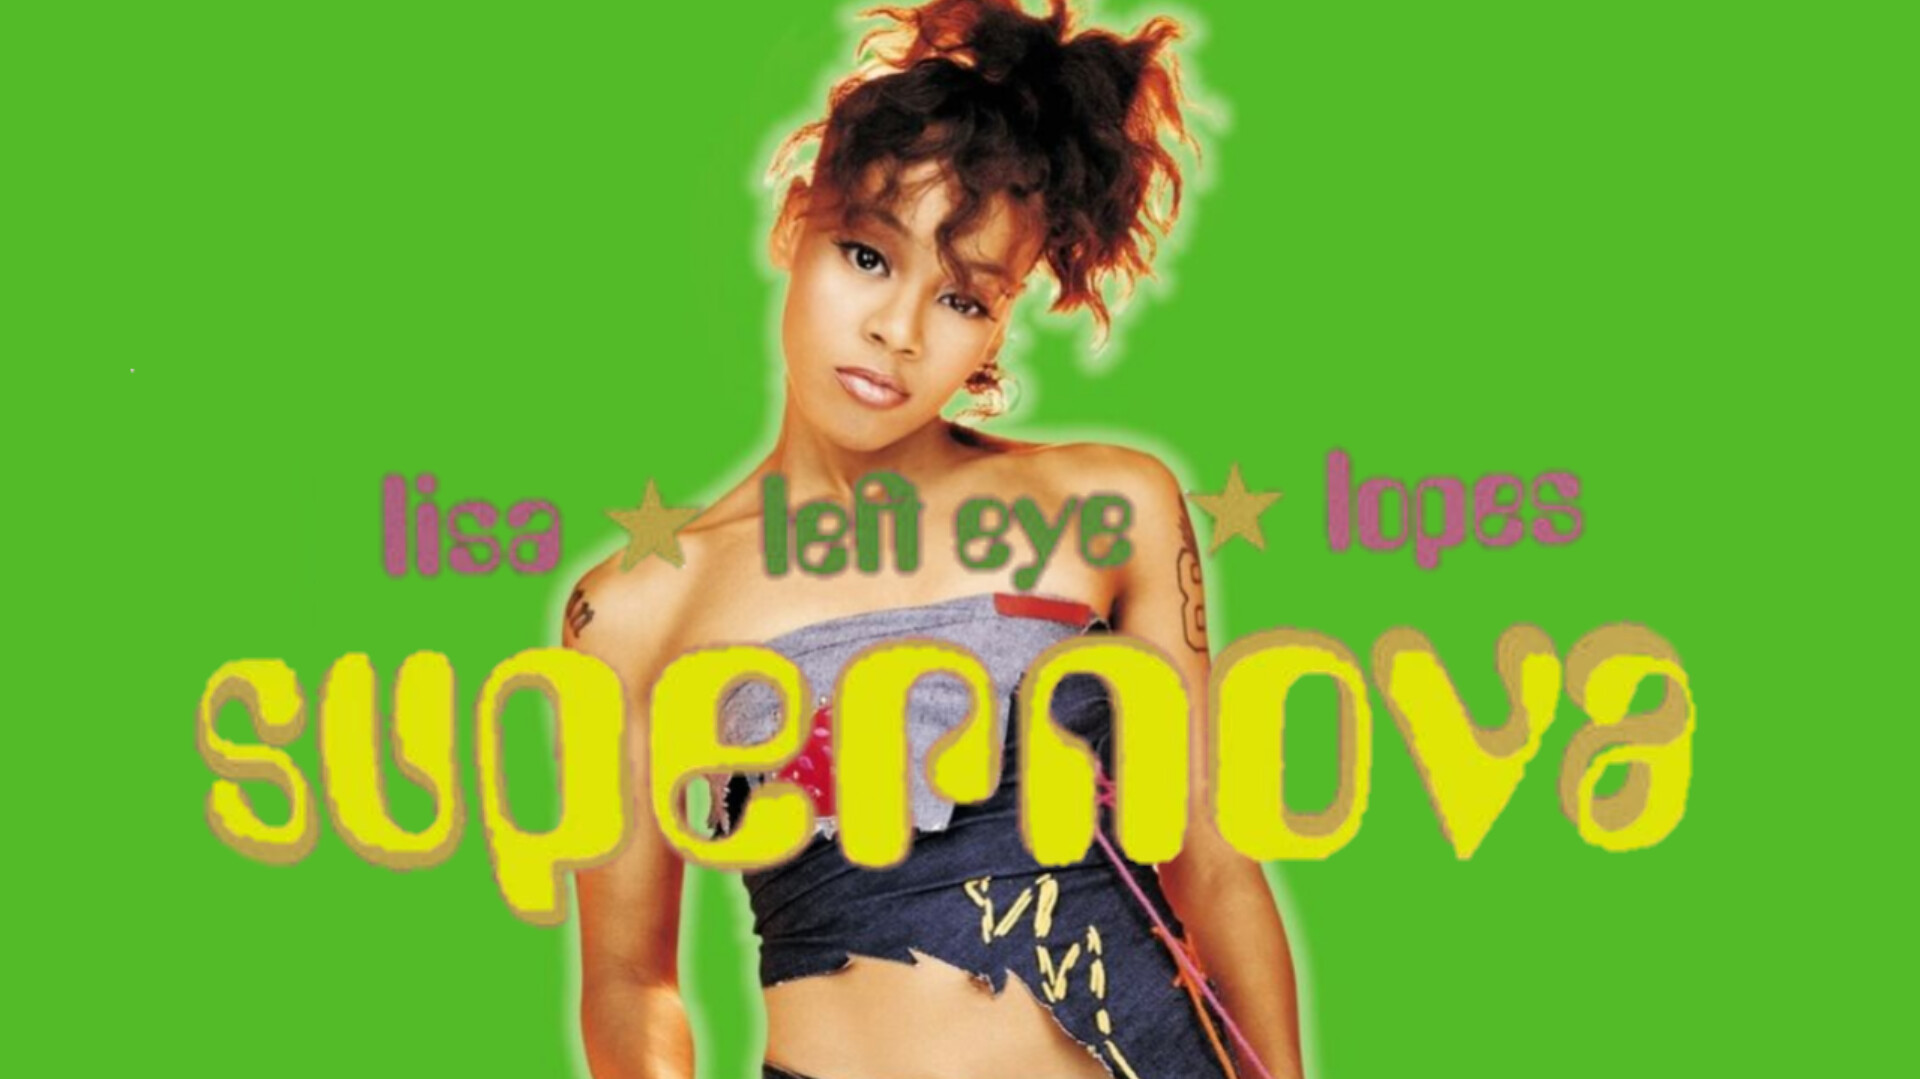 Left Eye’s ‘Supernova’ Album Will Be Released to Streaming Platforms ‘When The Time Is Right’, Says Her Sister Reigndrop Lopes